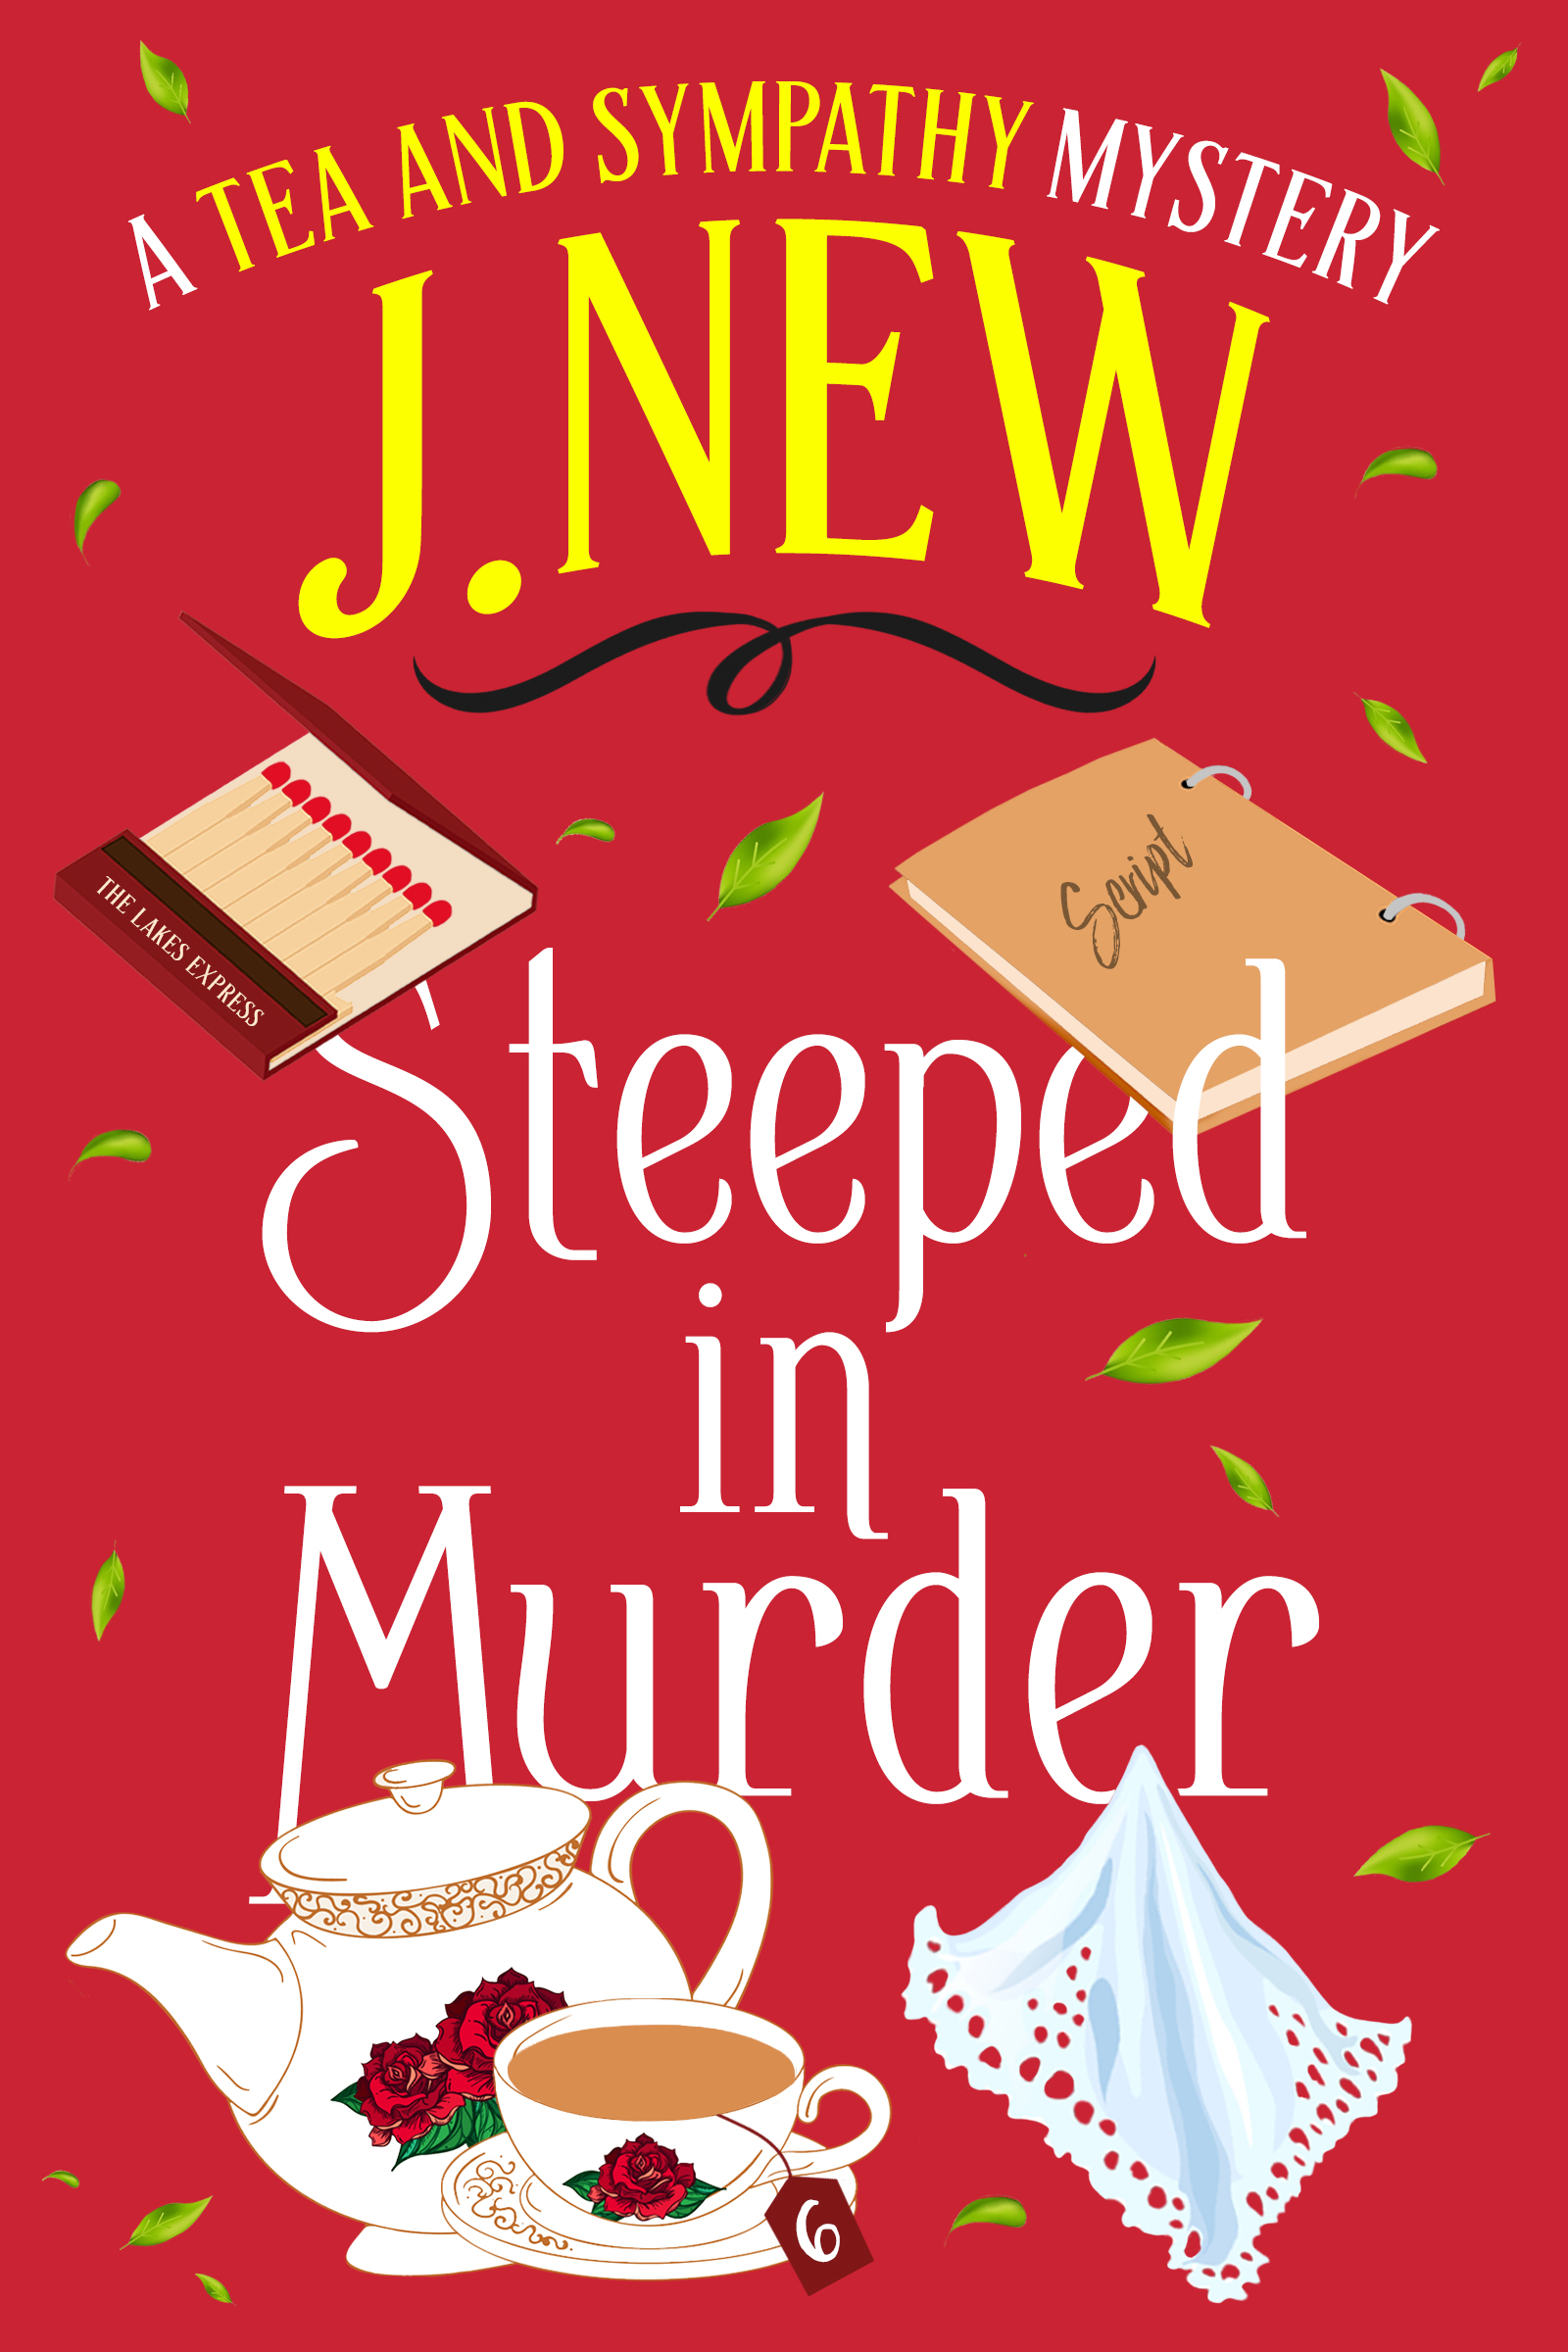 Steeped in Murder, book 6 in the popular British cozy culinary mystery series by author J. New